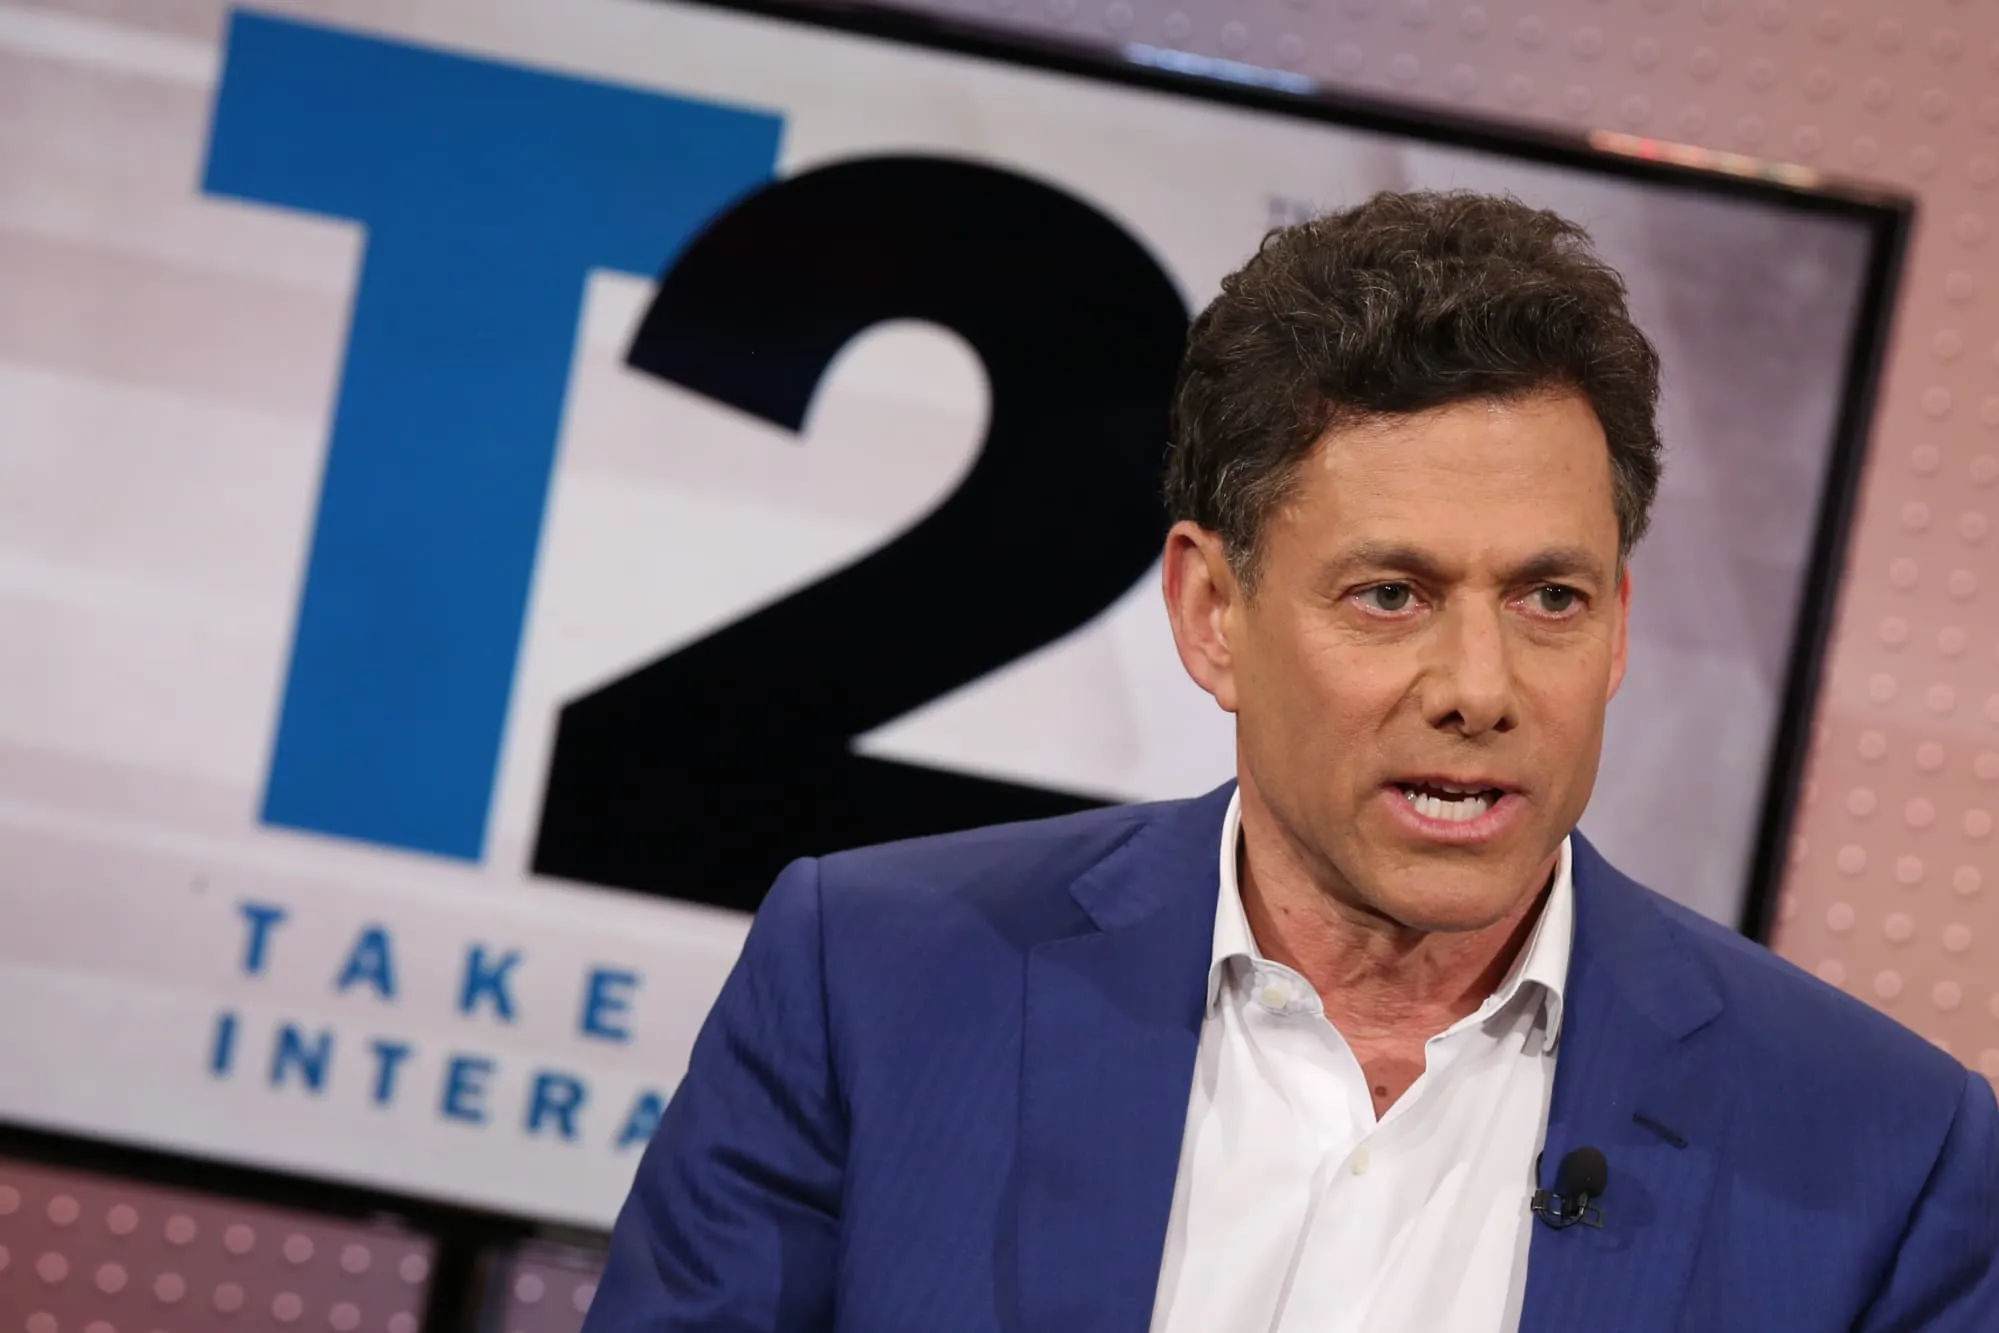 Watch CNBC's interview with Take-Two Interactive CEO Strauss Zelnick